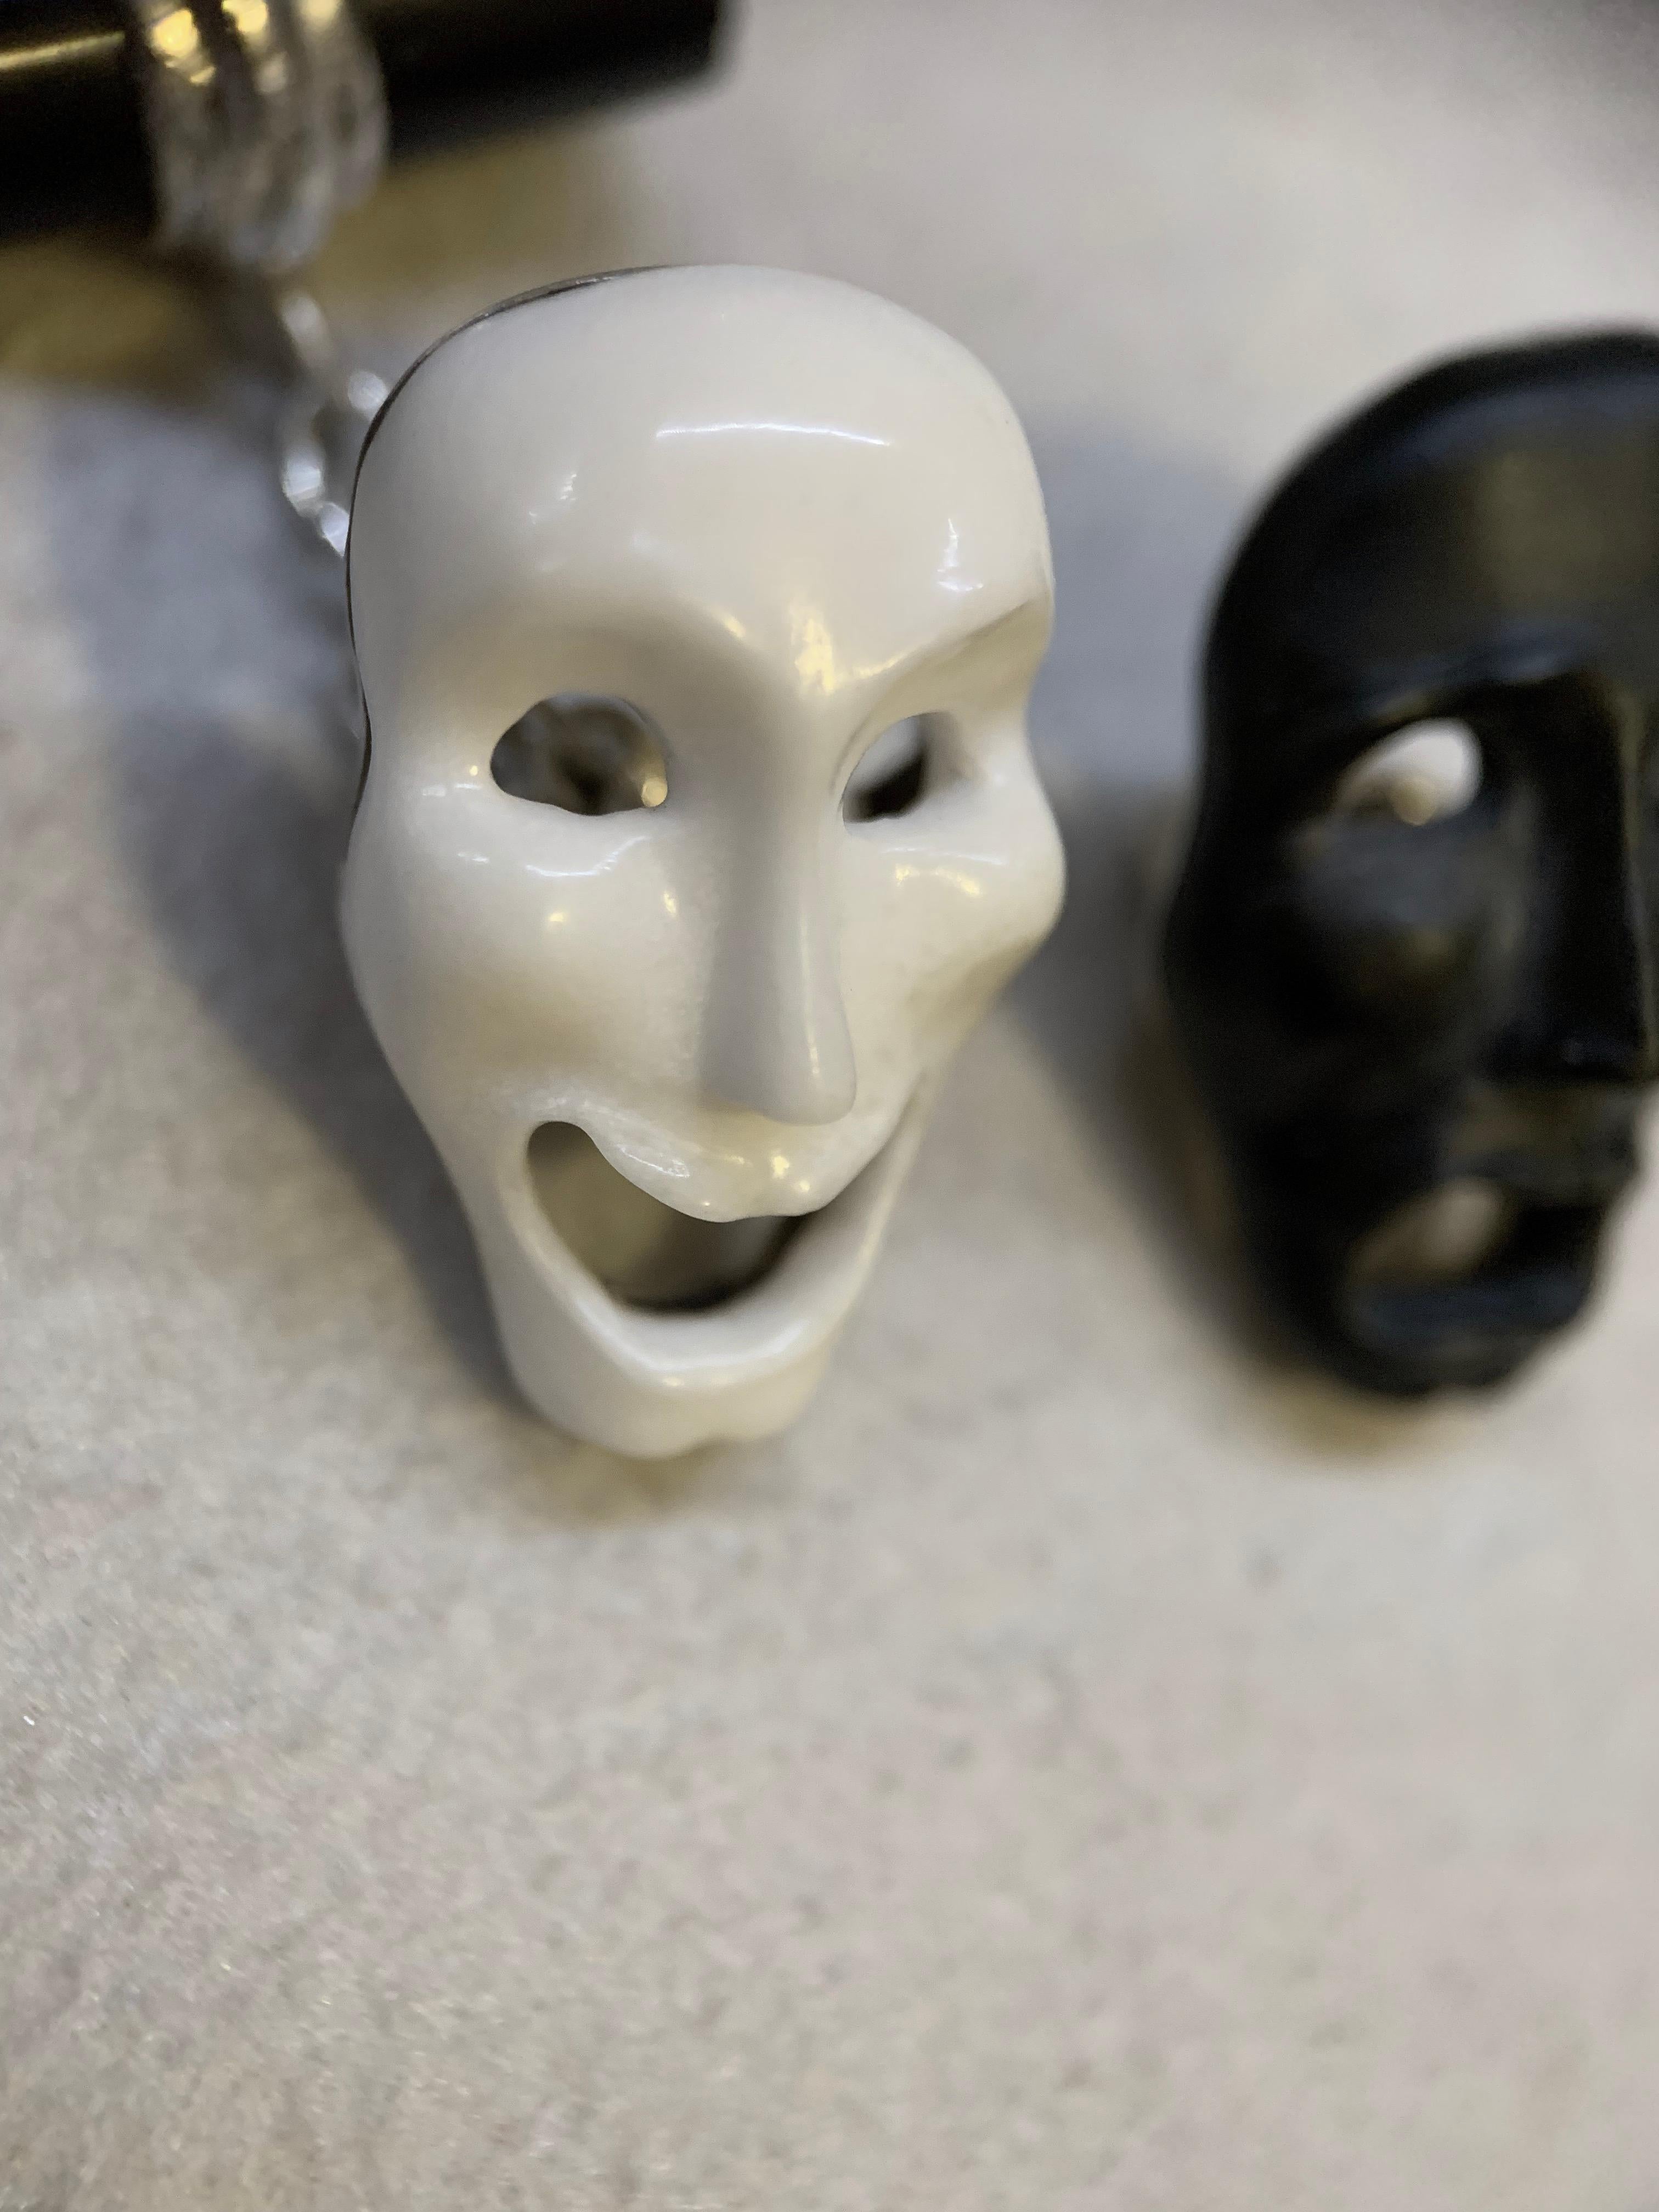 Comedy and Tragedy theater masks cufflinks totally hand carved , made in white agate and black onyx.
Mounting in 18 karat white gold.

Alterations can be made in Yellow or White Gold.
The bars variations are Onyx, White Agate, Lapis Lazuli, Mother